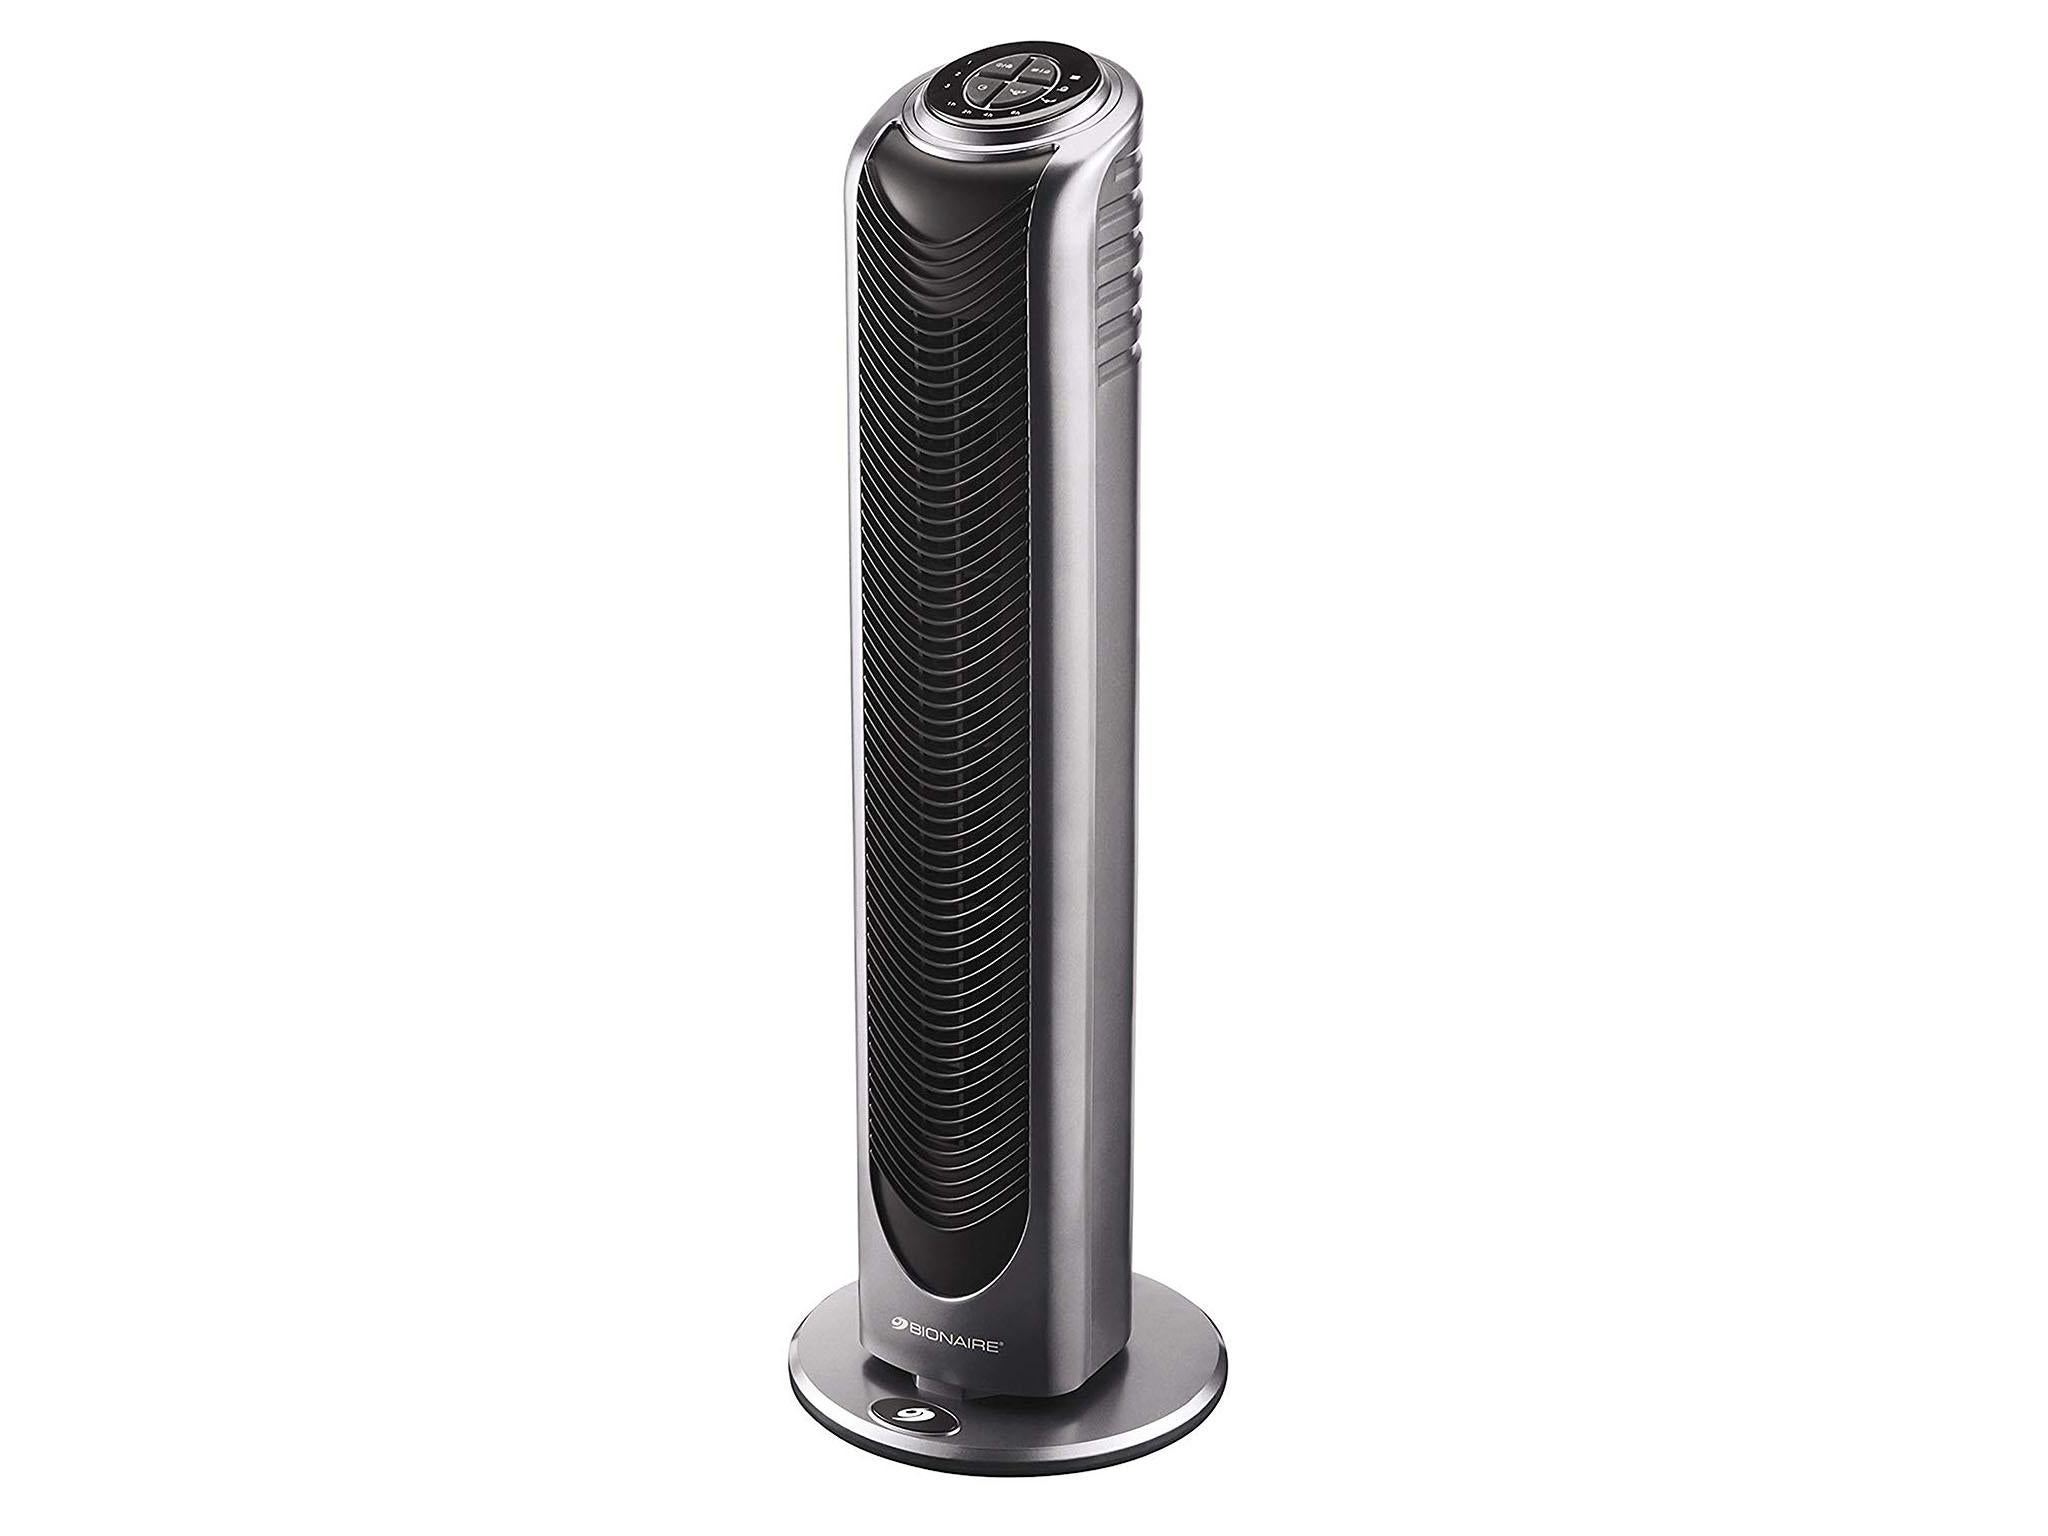 Httpsstaticindependentcouks3fs Publicthumbnailsimage2019060510bionaire Ocillating Tower Fan With Remote Control And Timer for size 2048 X 1536